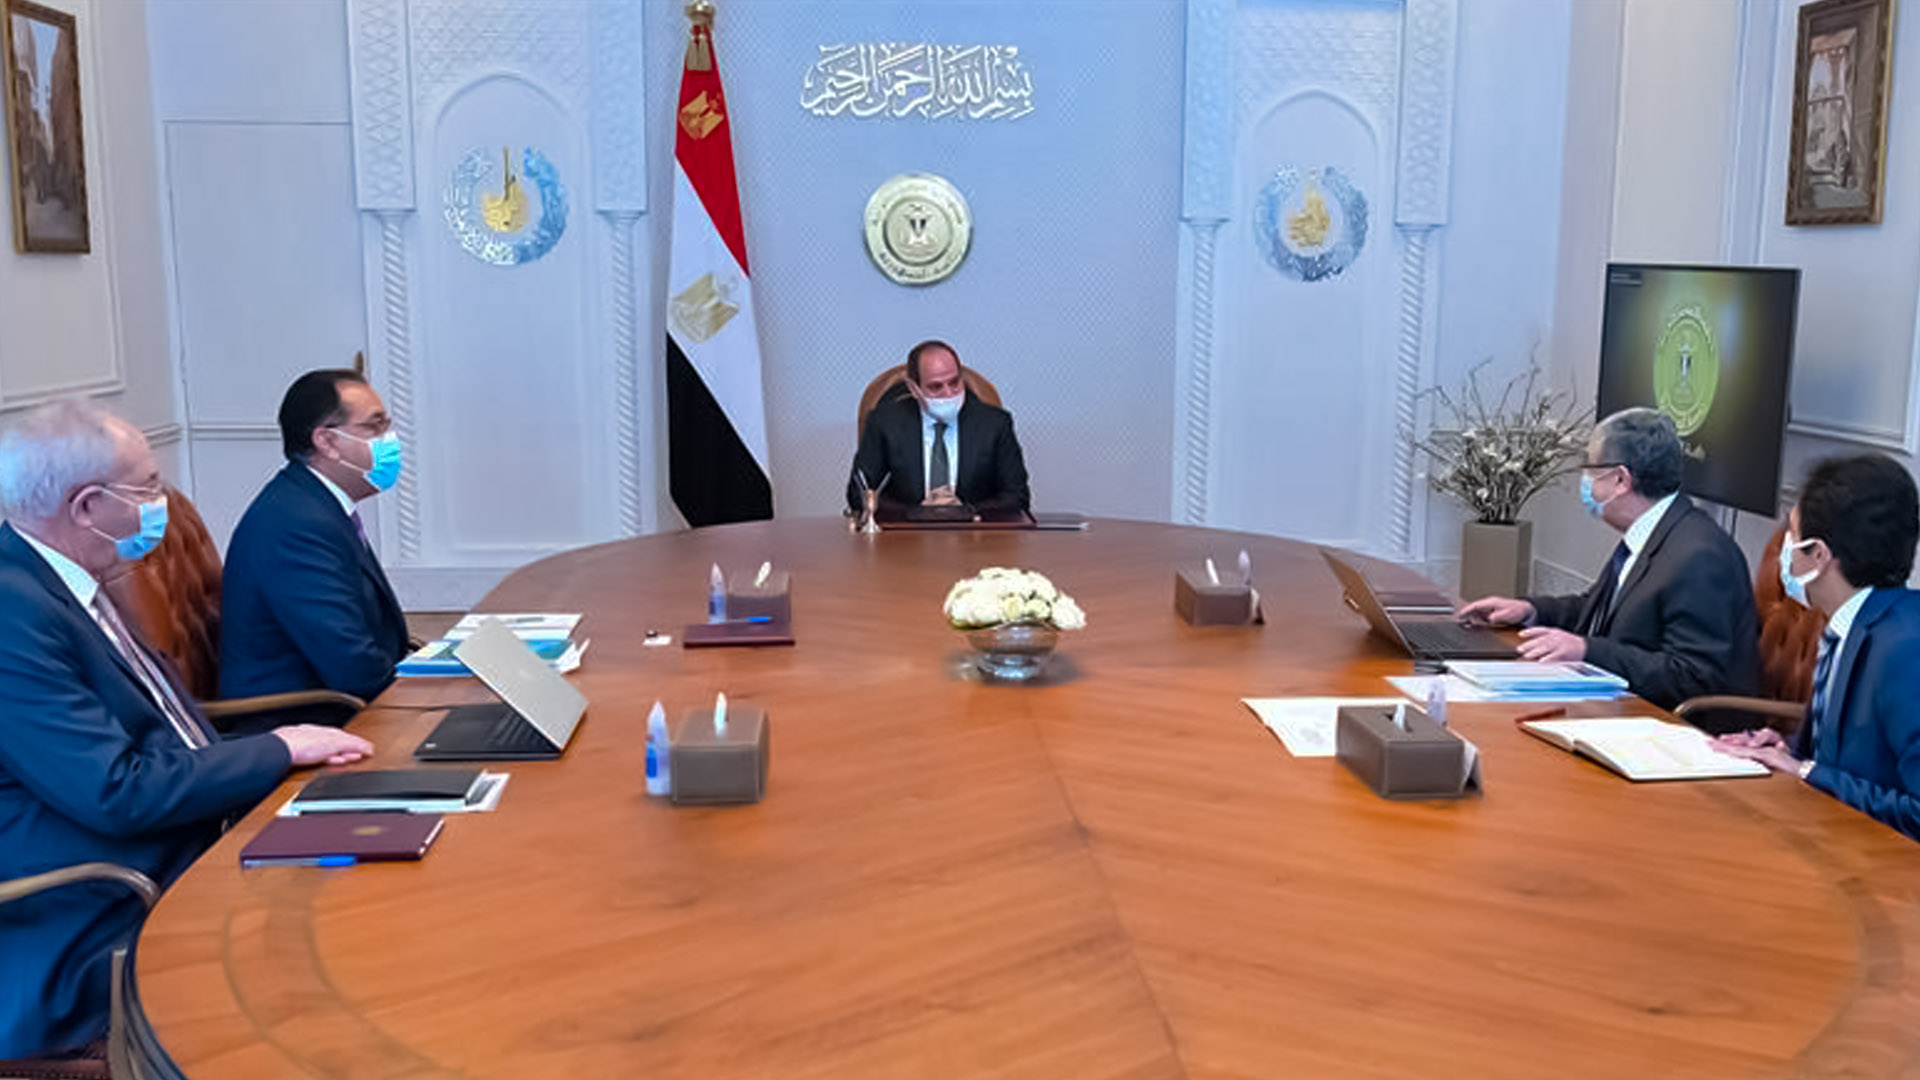 President El-Sisi discusses green hydrogen production projects